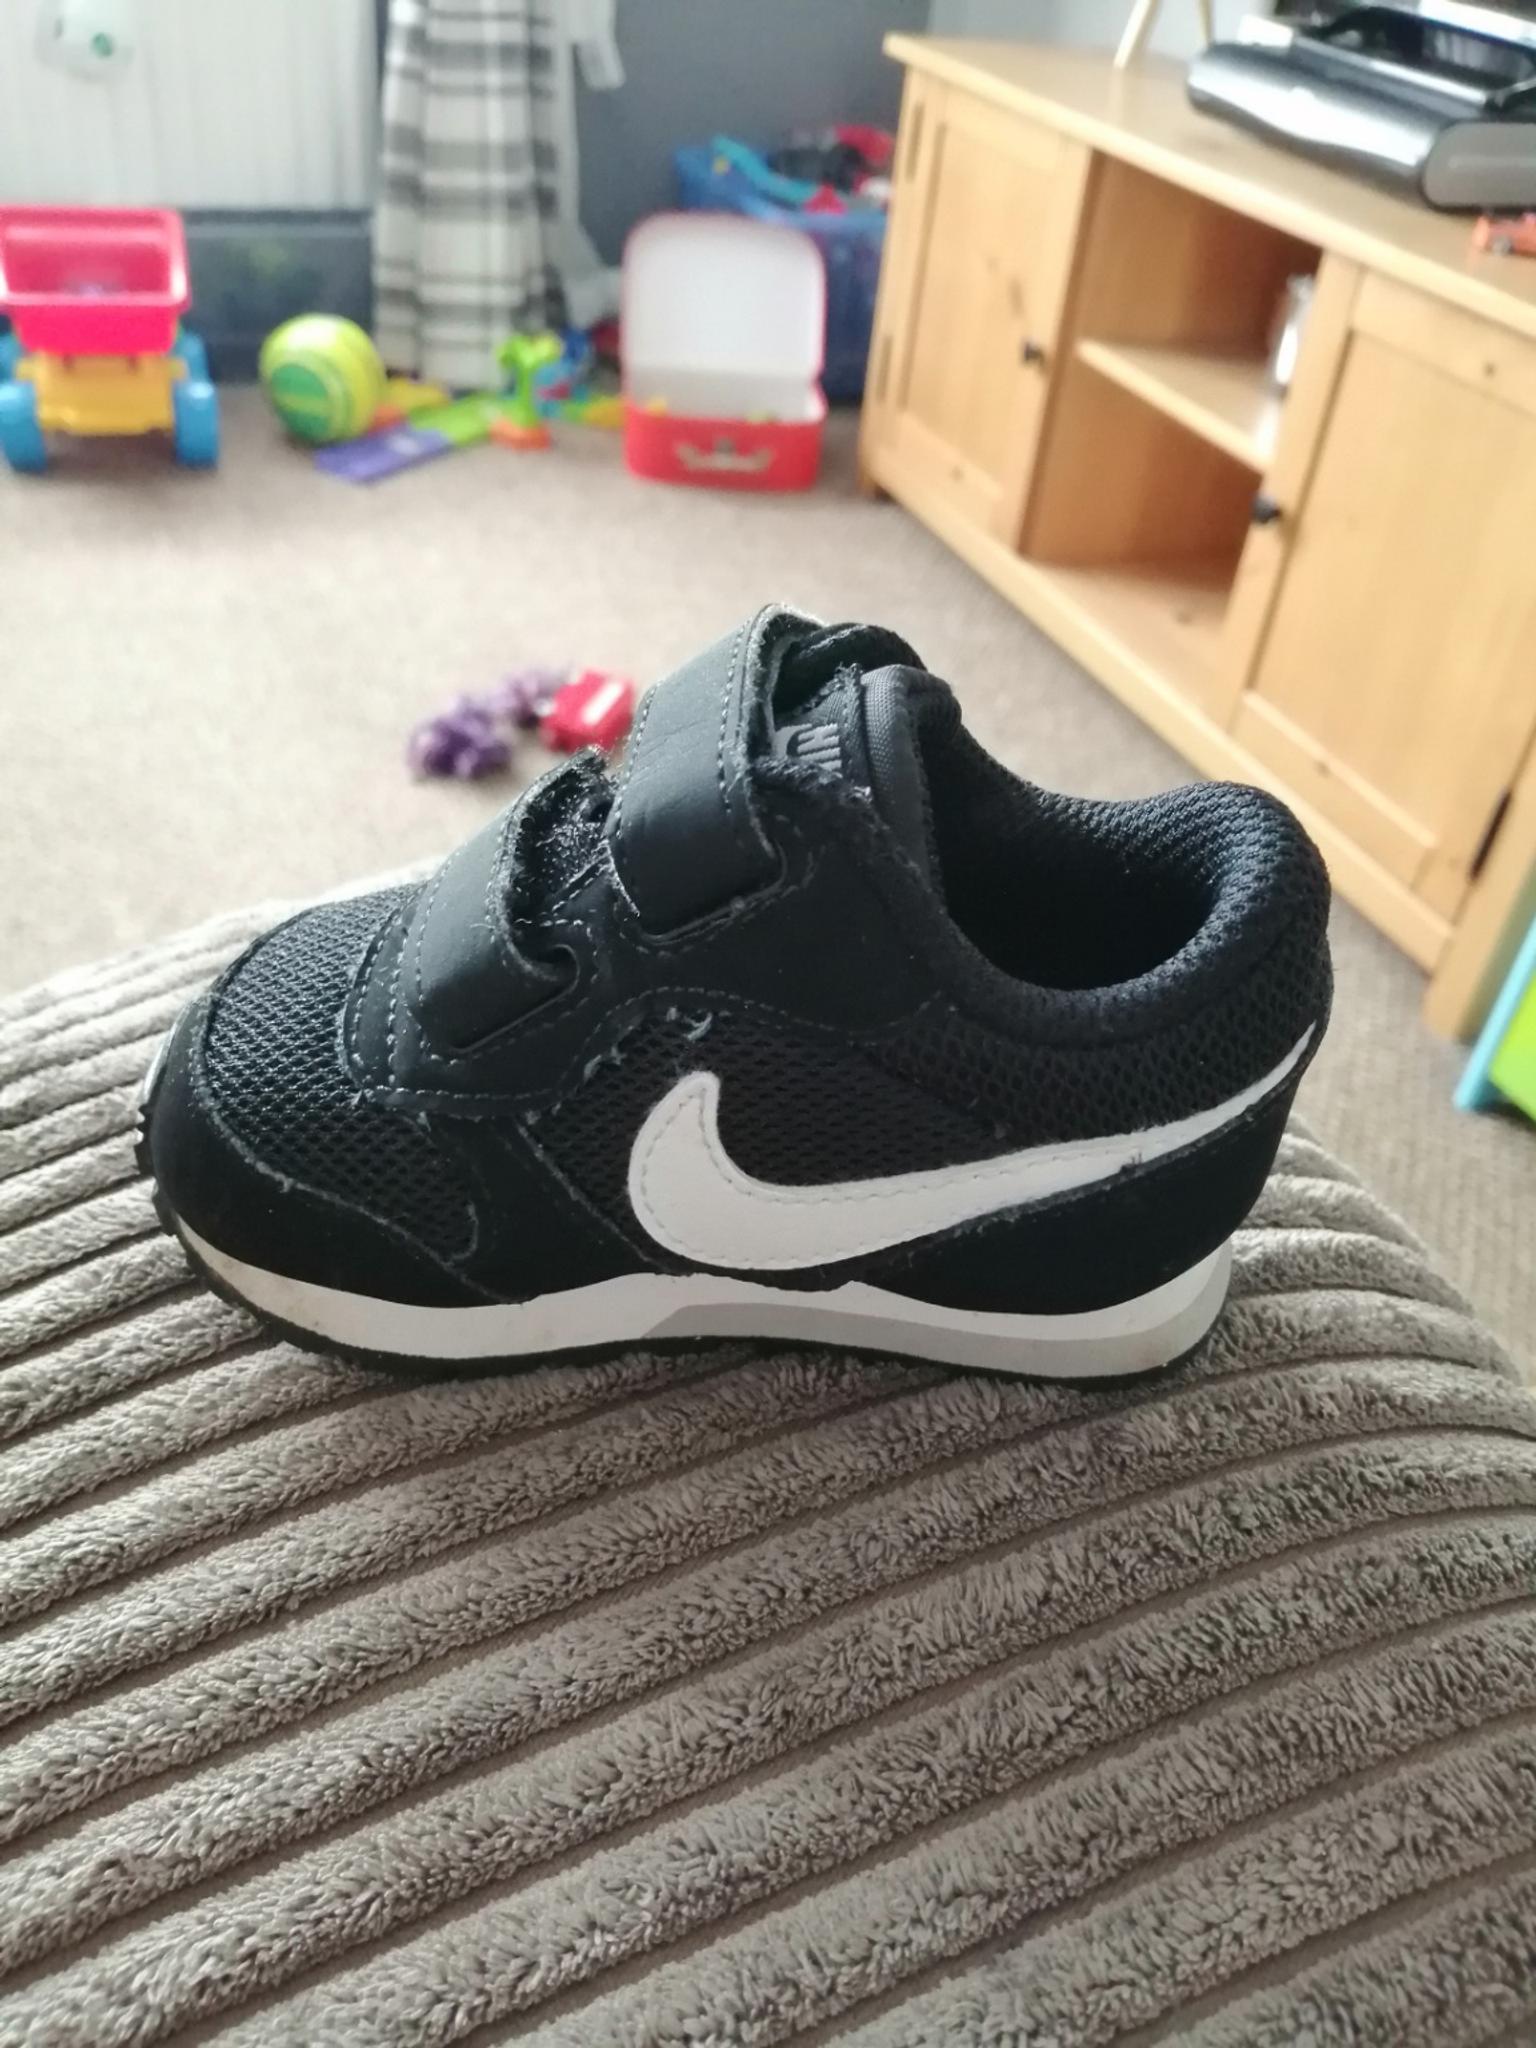 nike trainers size 3.5